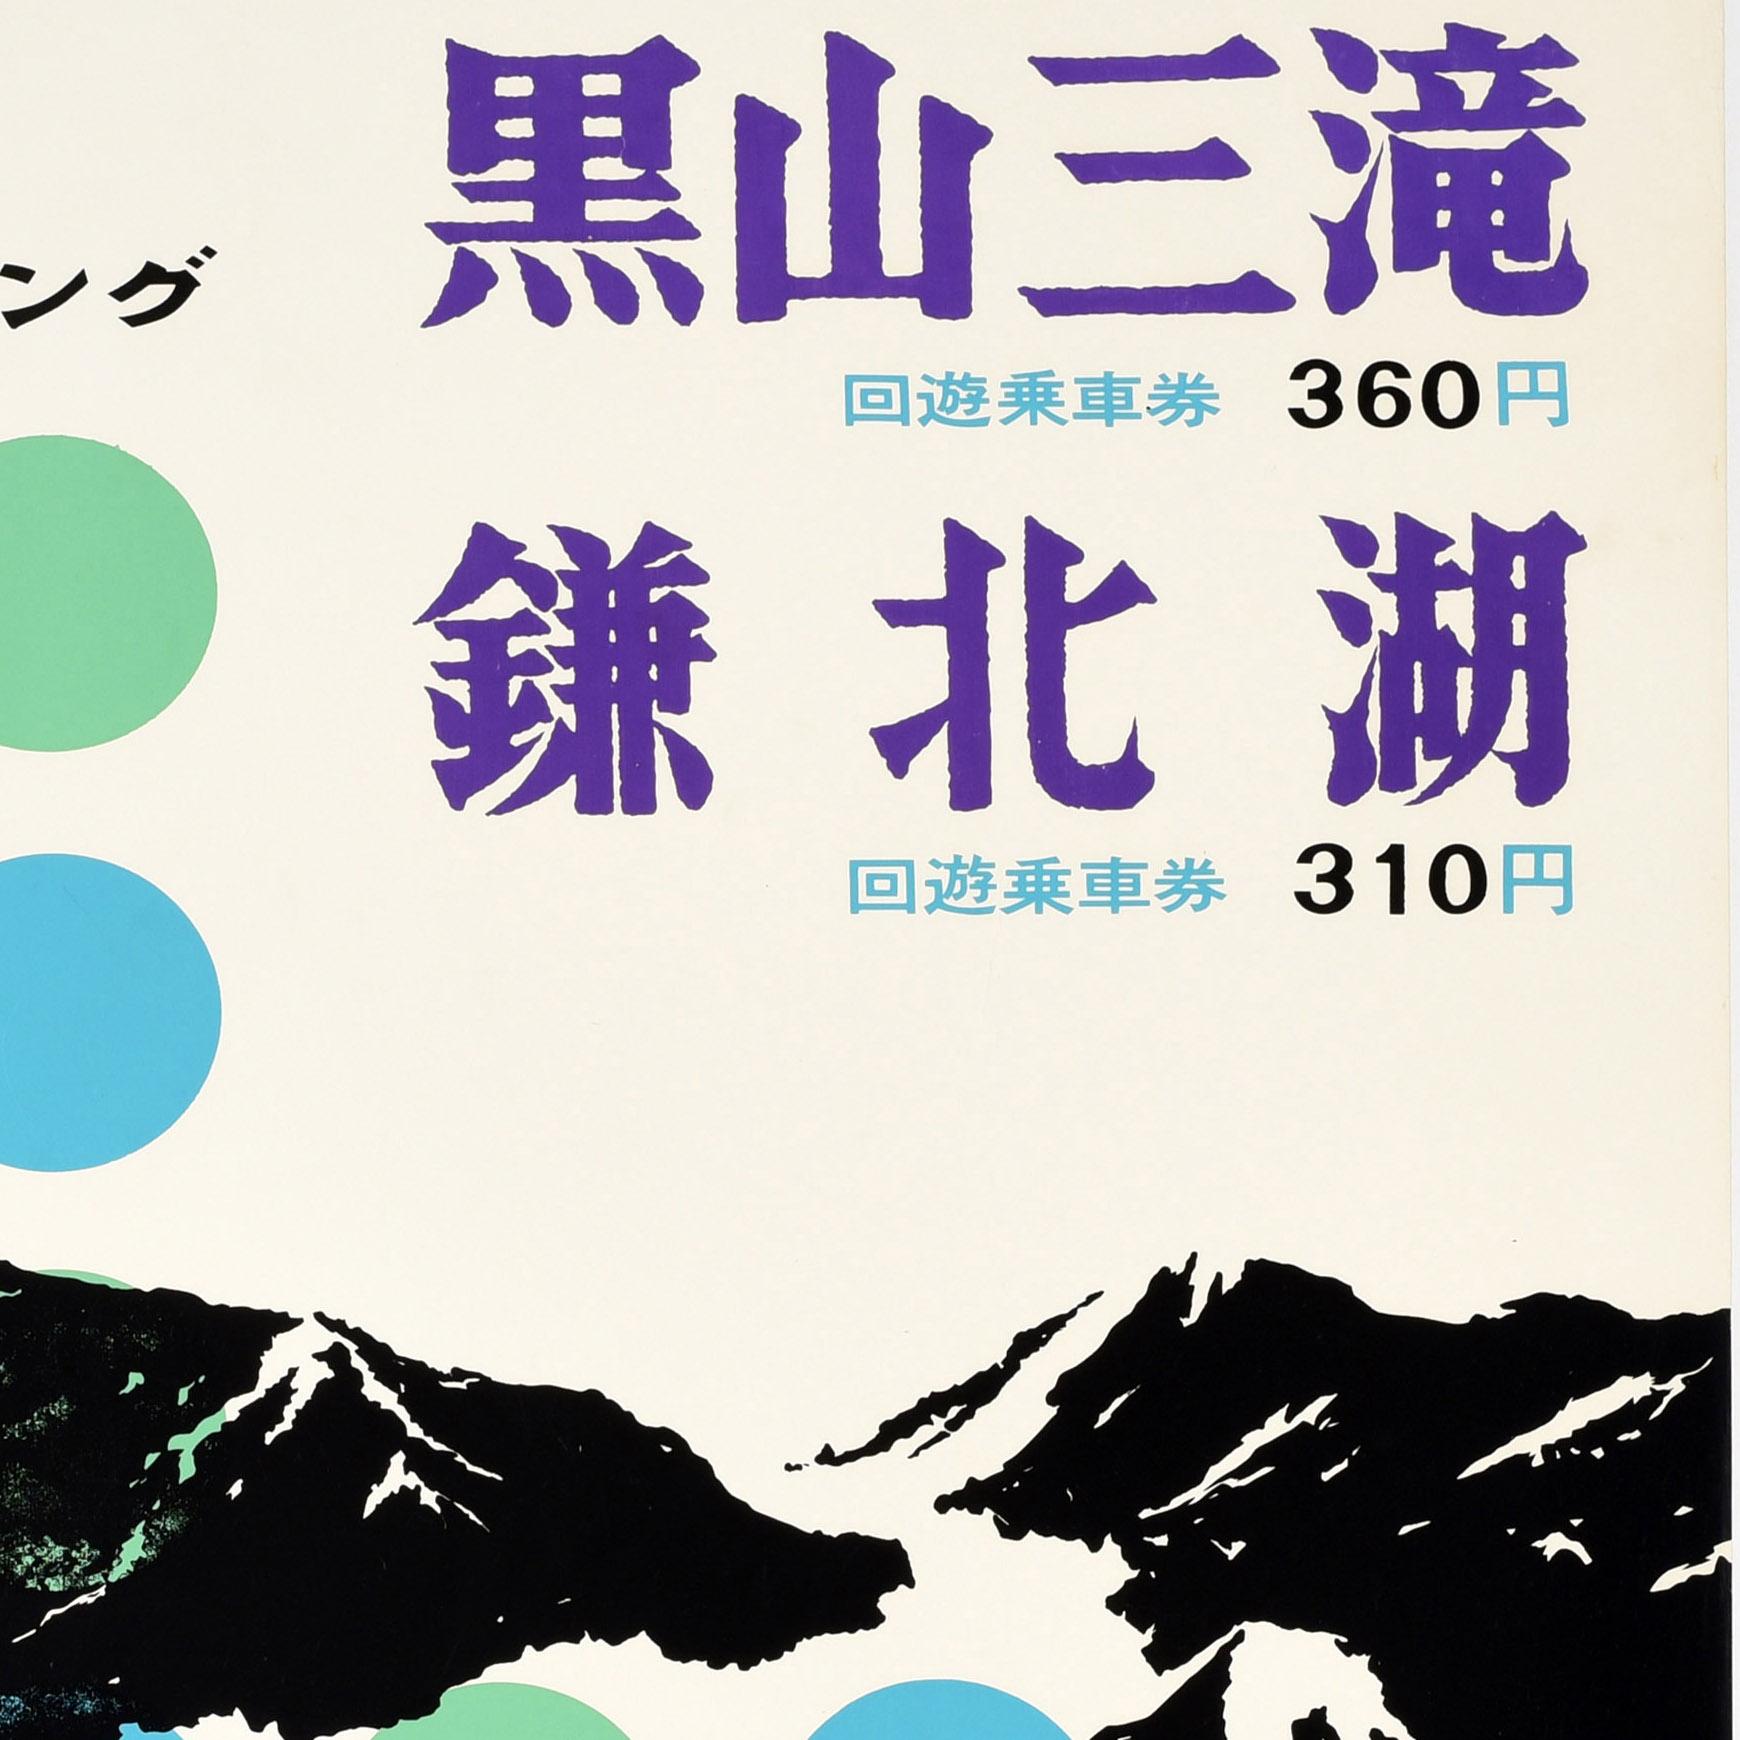 Original vintage travel poster for Kuroyama's Three Waterfalls - Medaki Falls, Odaki Falls and Tengu Taki - featuring the mountain range with gorges, valleys and trees in black over green and blue dots with the text advertising walks and hiking